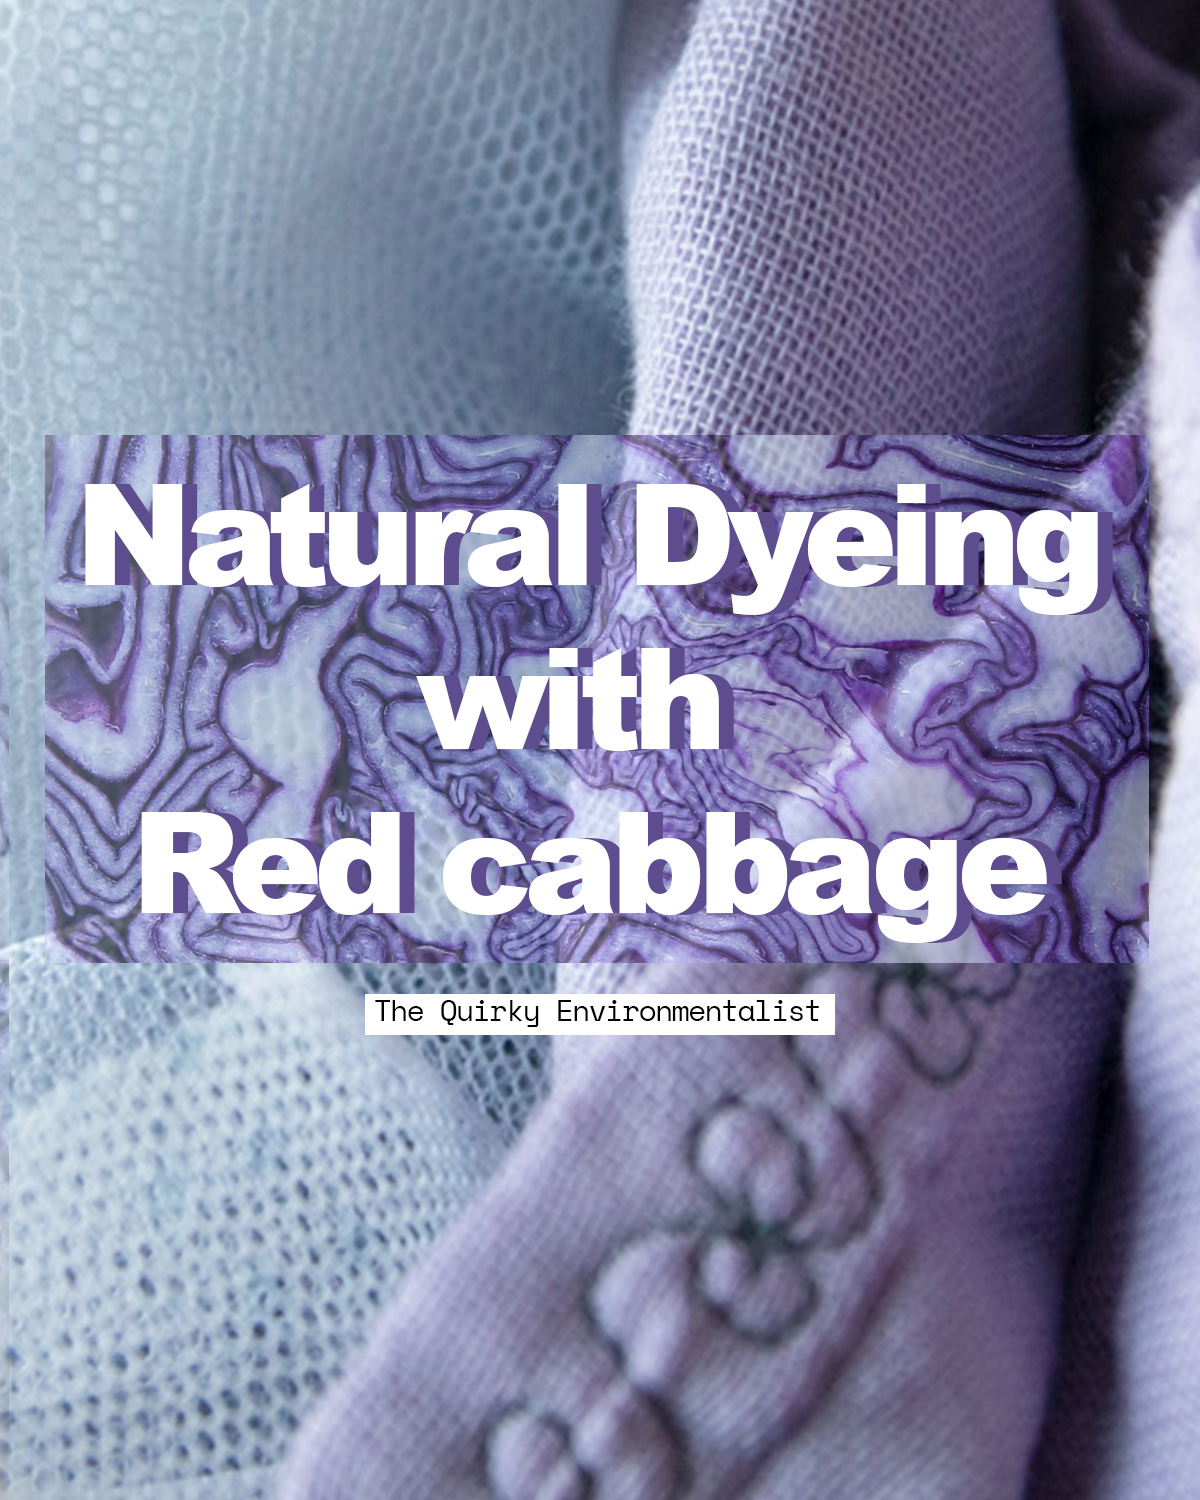 How To Dye Cotton Blue With Red Cabbage (No Mordant) - Sew Historically